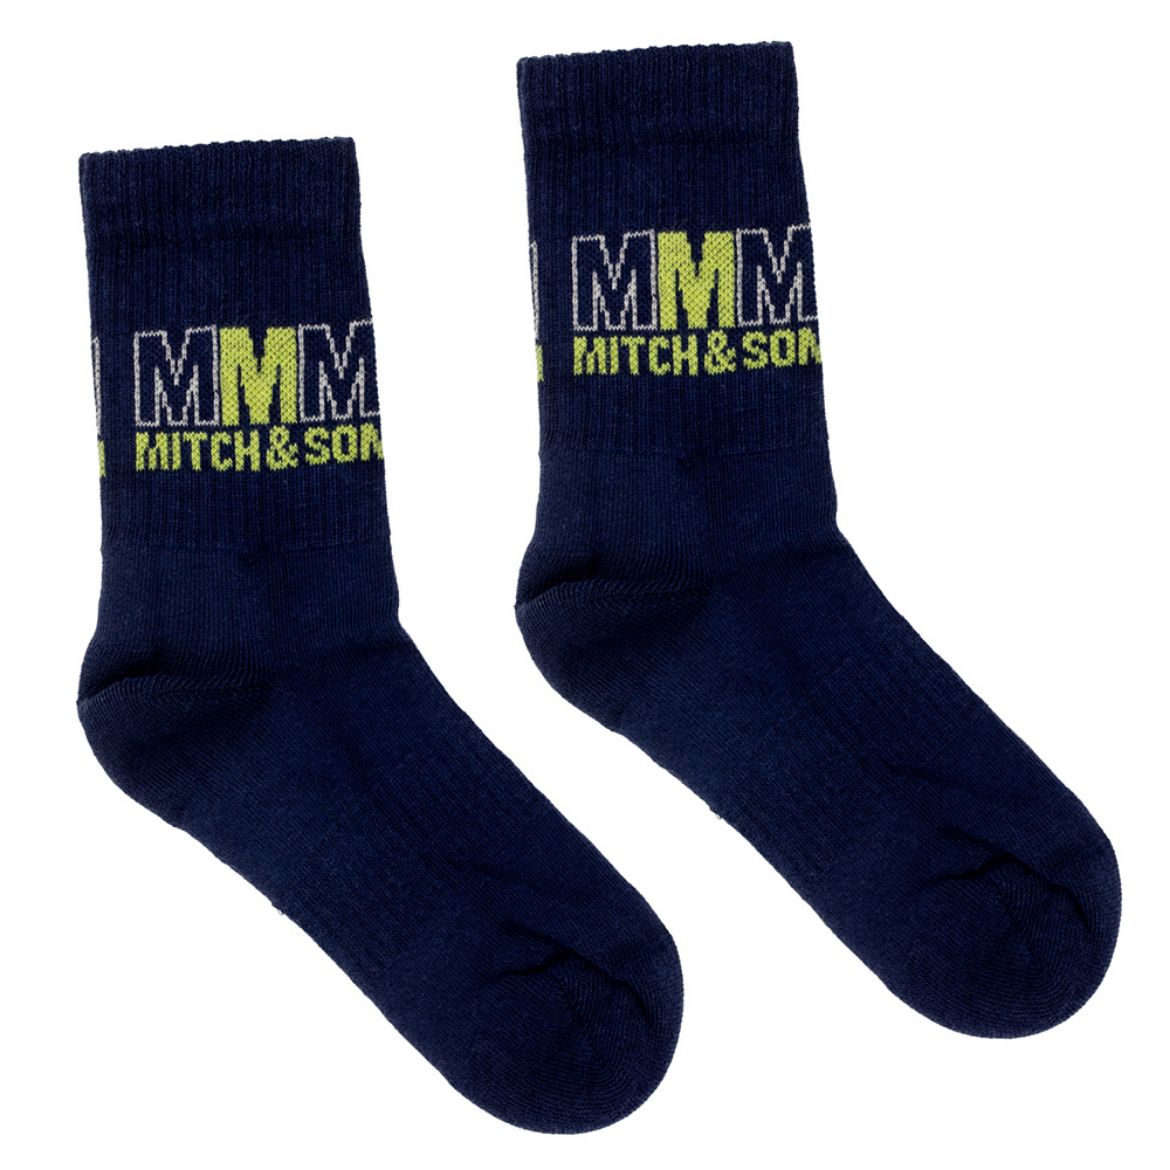 Picture of Mitch & Son West Navy Socks